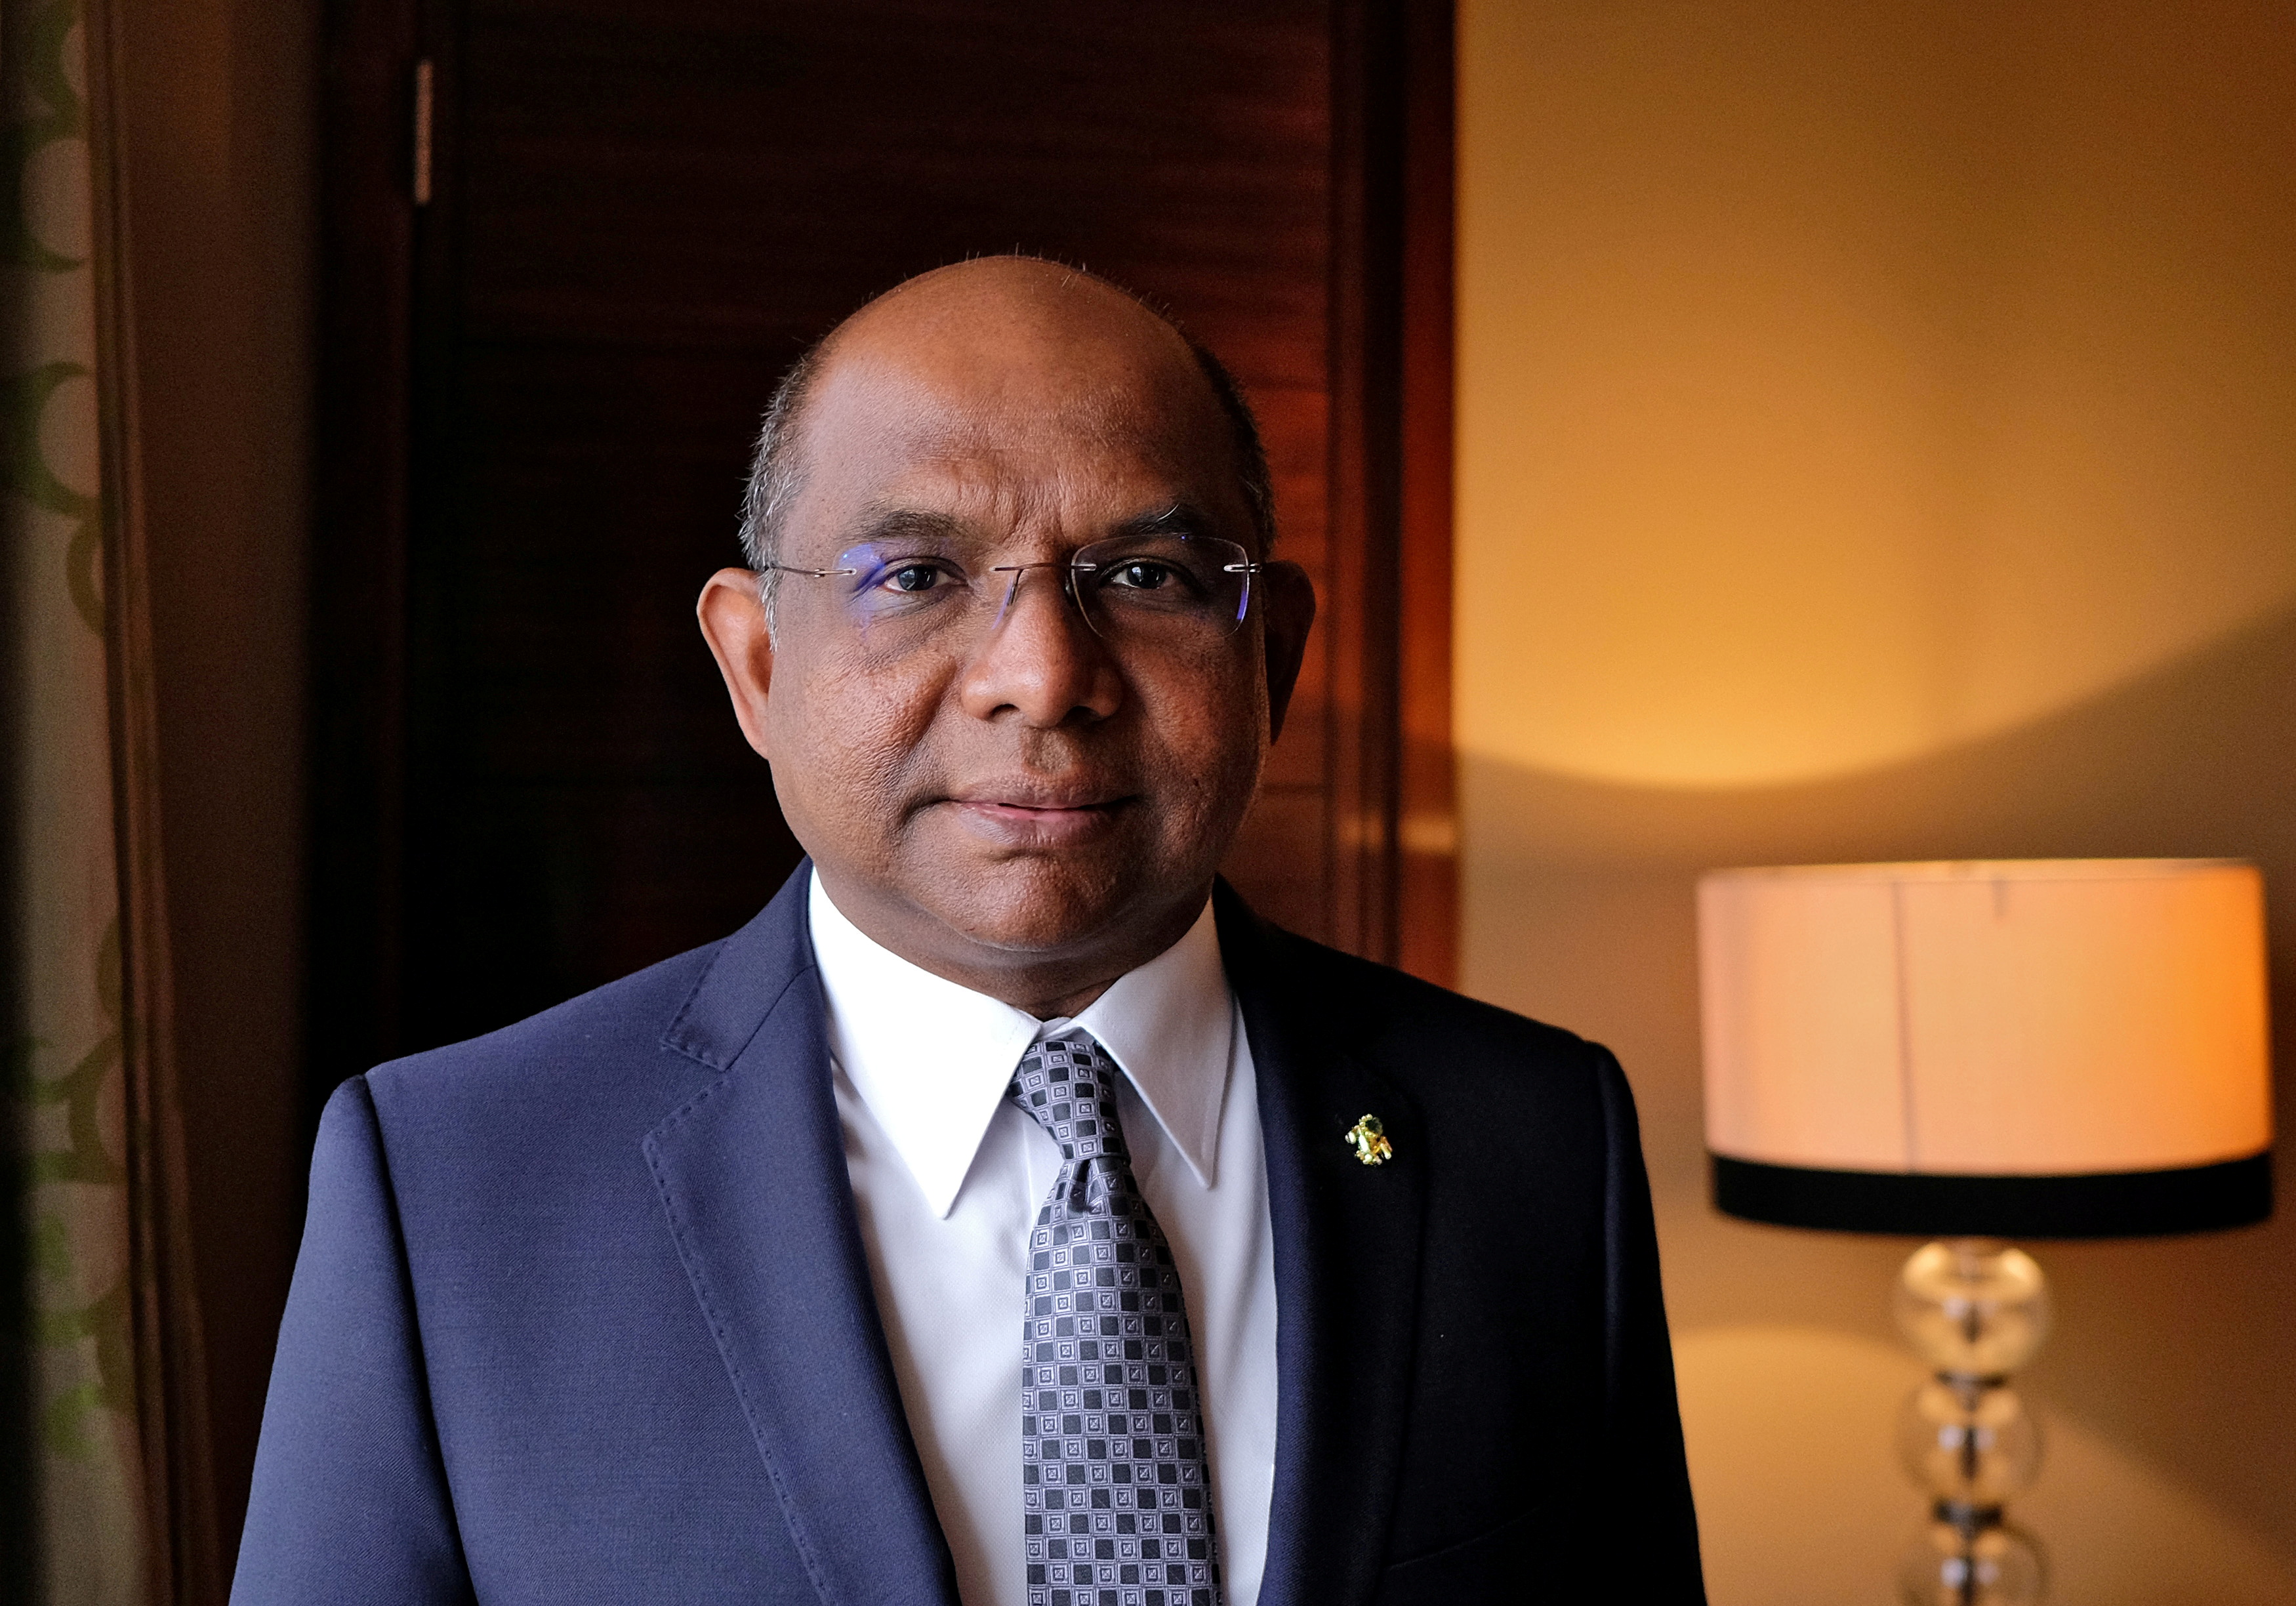 Maldives' Foreign Minister Abdulla Shahid poses after an interview with Reuters in New Delhi